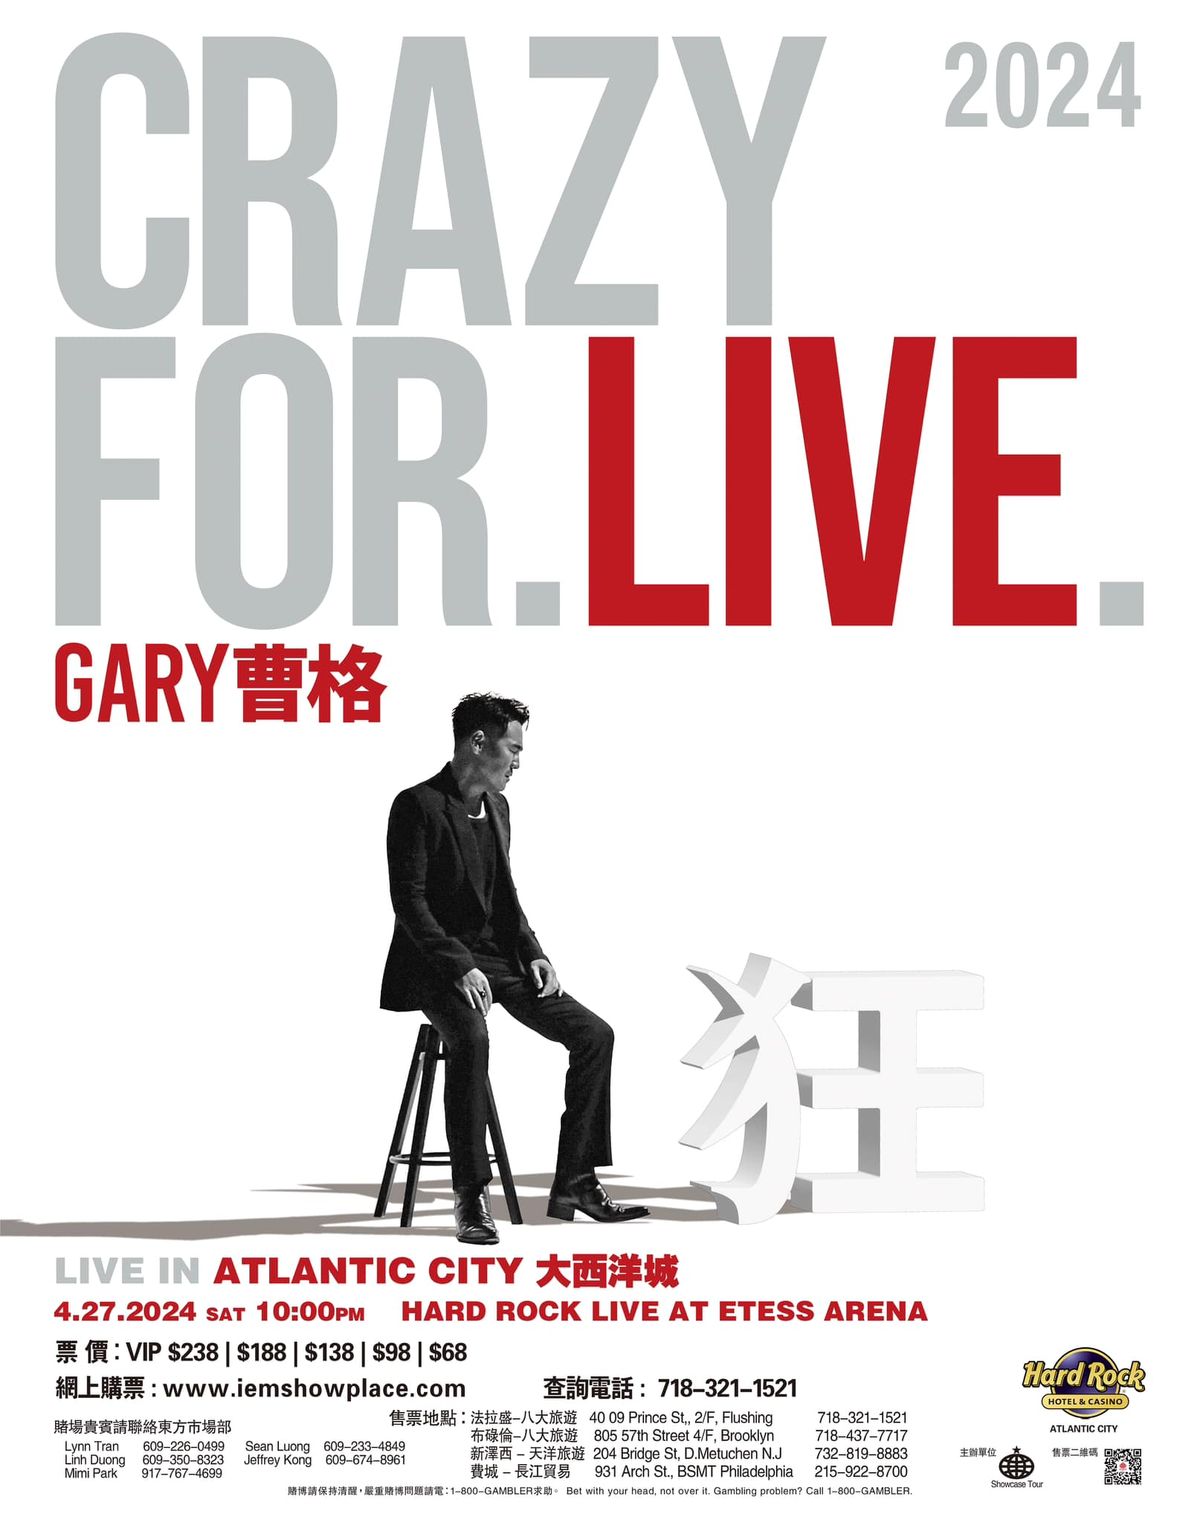 Gary Chaw "Crazy for Live" Concert in Atlantic City \u66f9\u683c \u5927\u897f\u6d0b\u57ce \u6f14\u5531\u6703